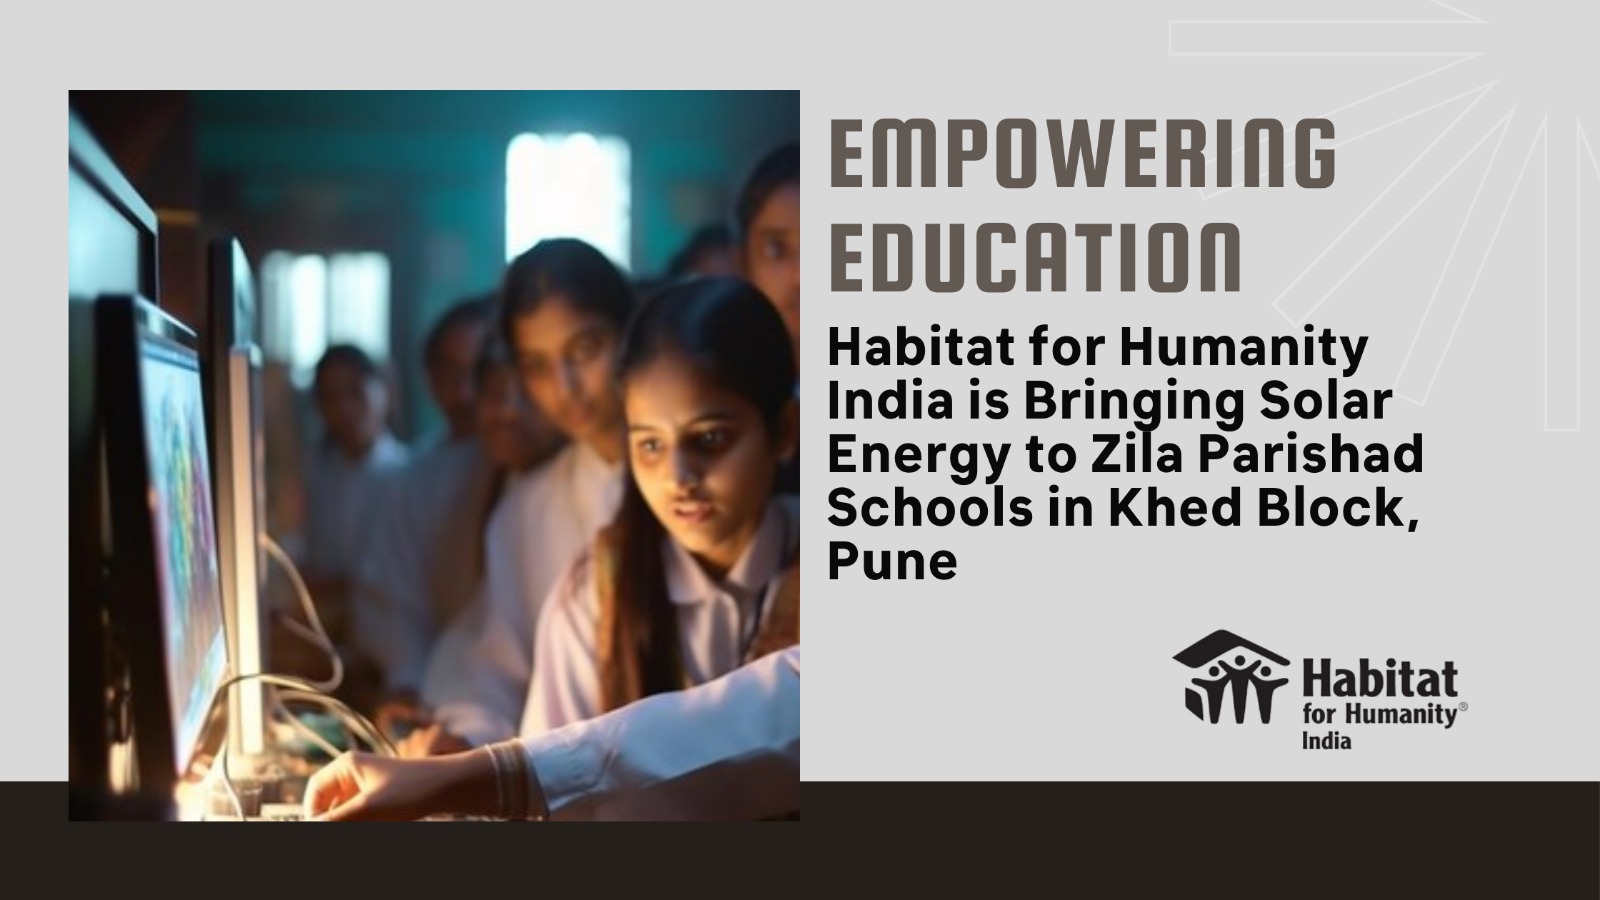 Habitat for Humanity India to provide access to solar energy in Zila Parishad Schools in Khed block, Pune